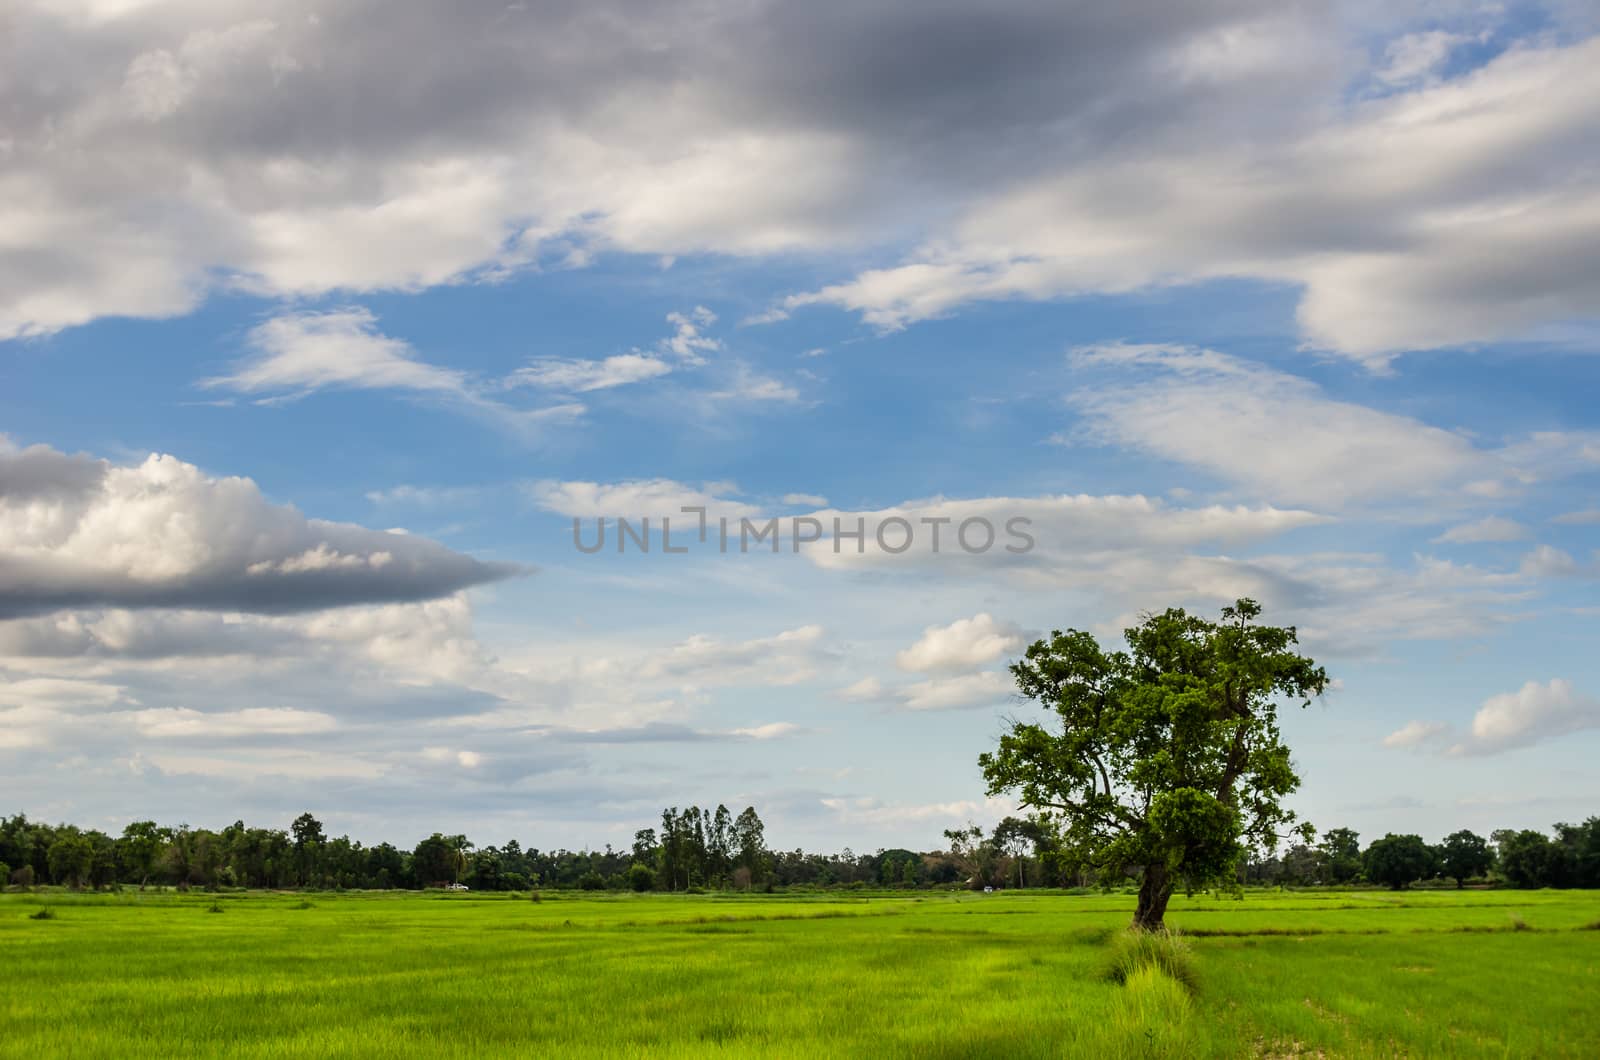 Tree grass field and sky in countryside Thailand